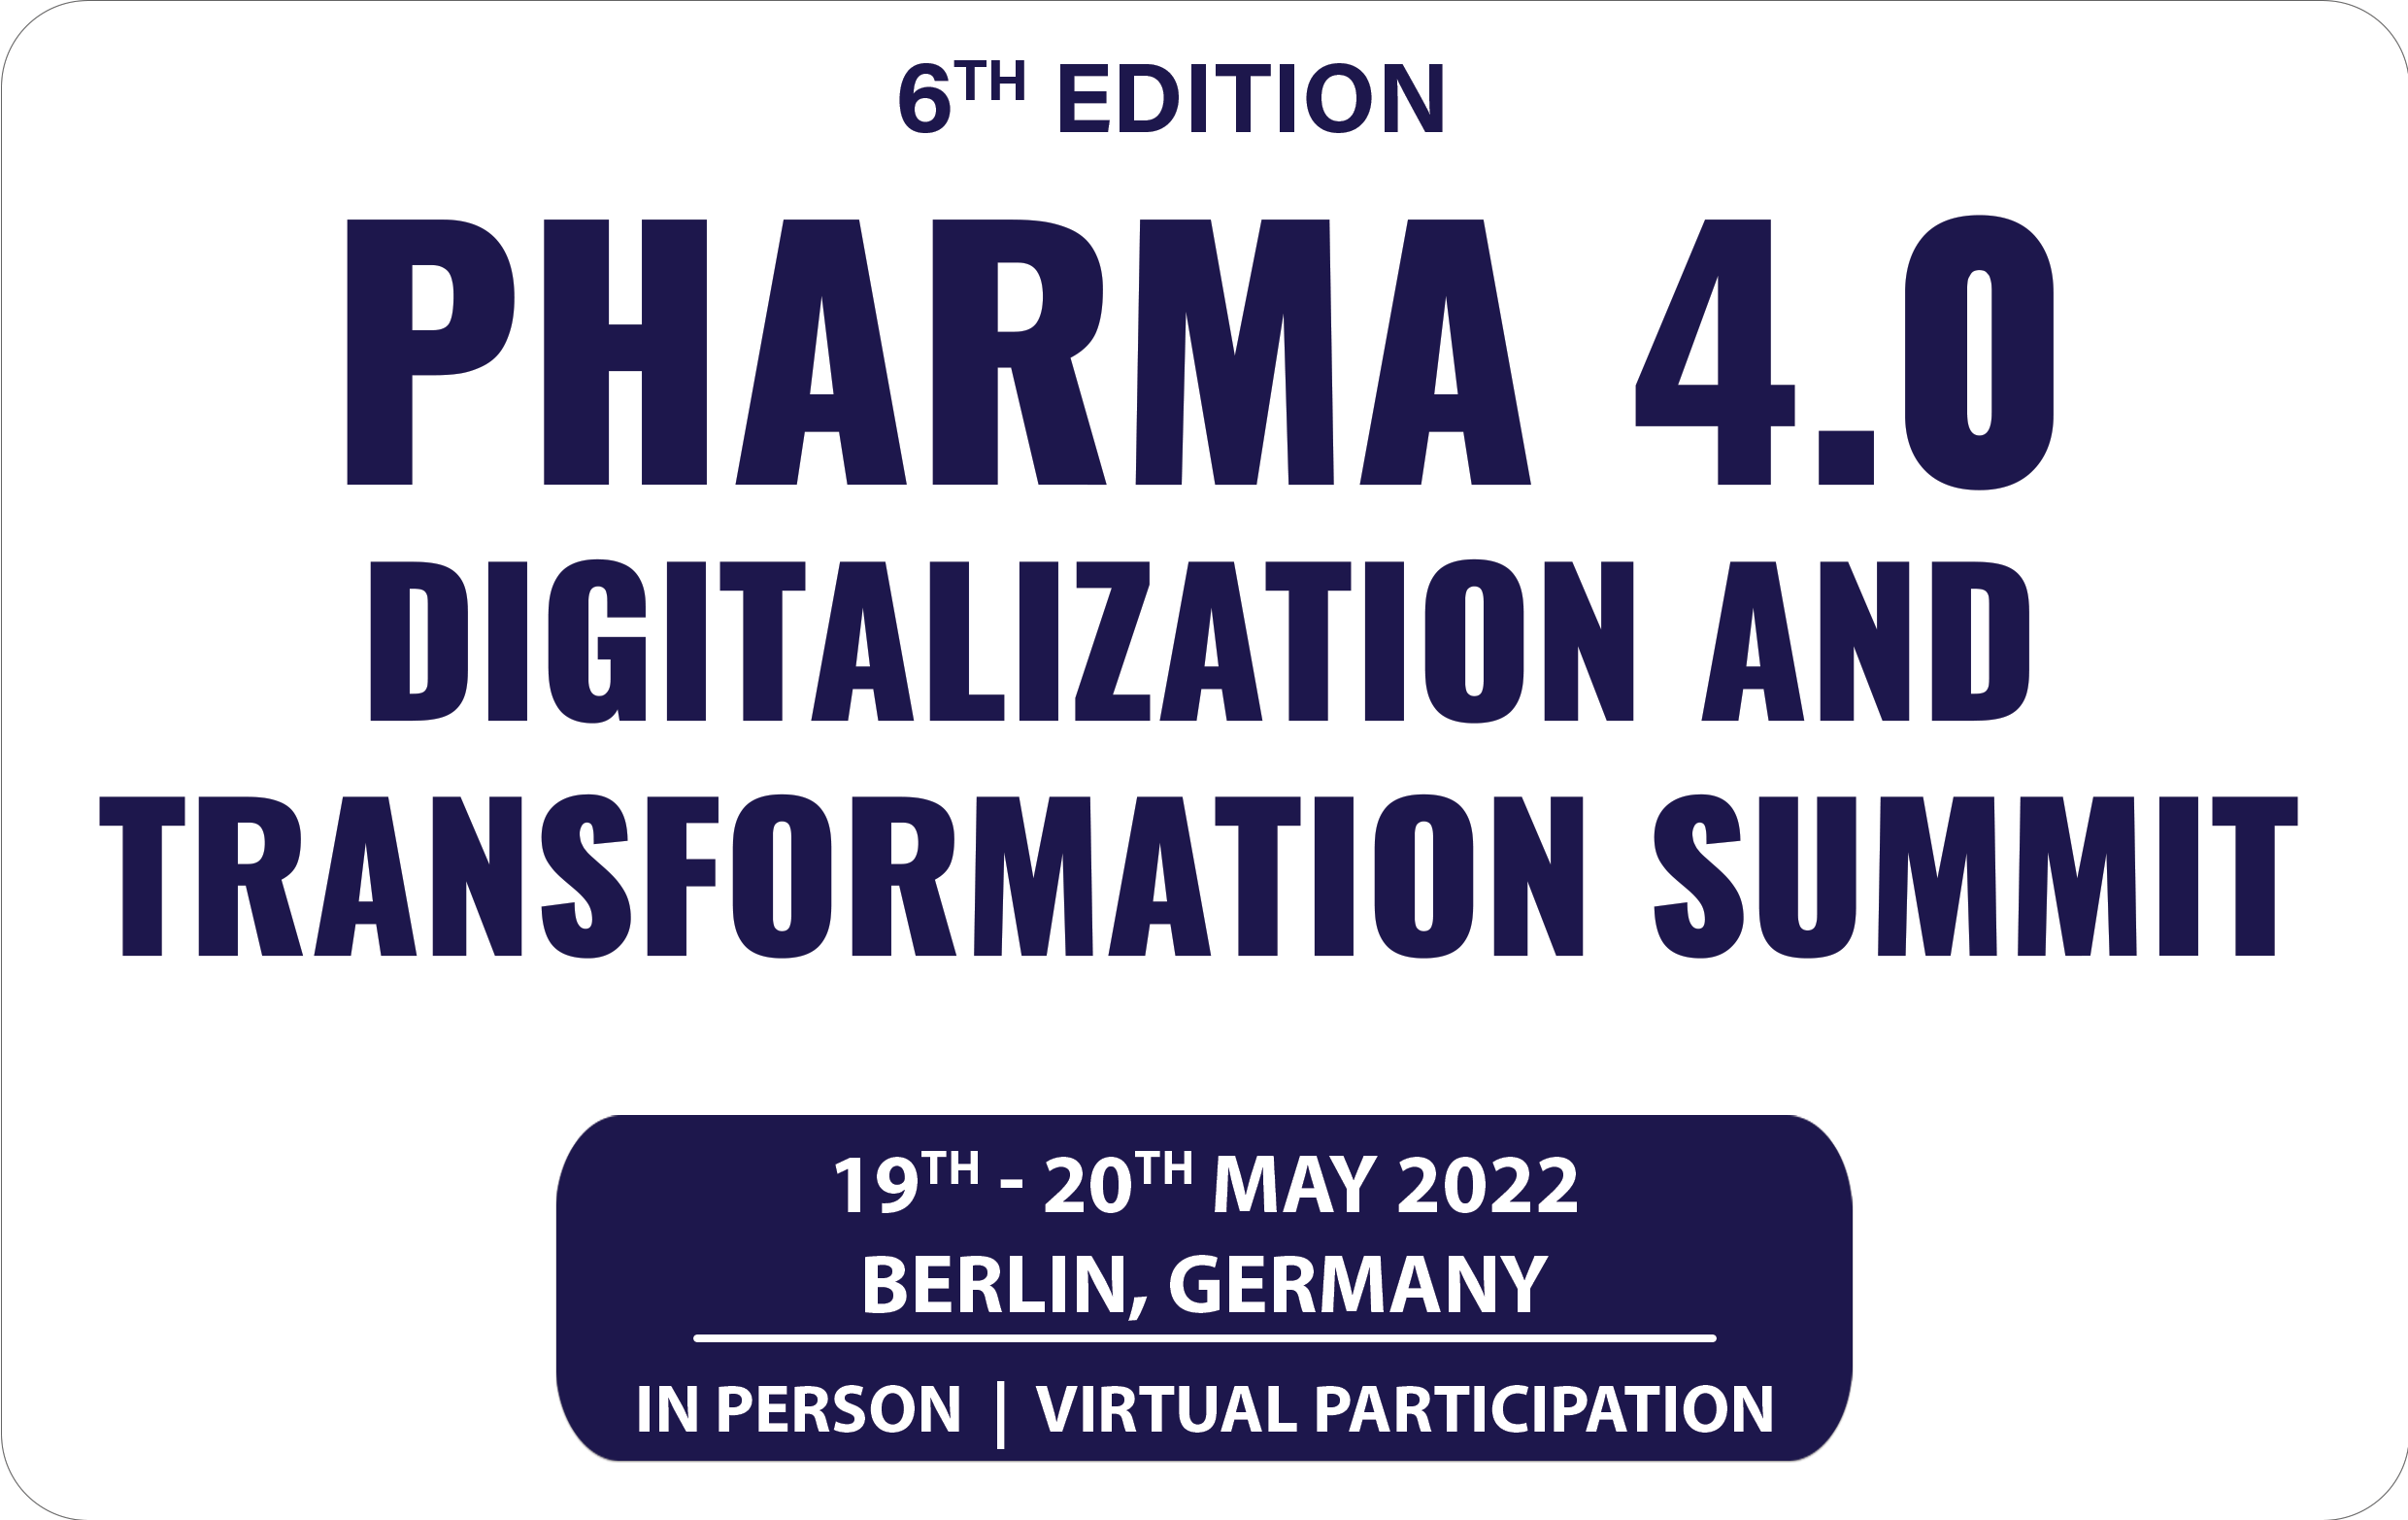 Pharma 4.0 – Digitalization and Transformation Conference